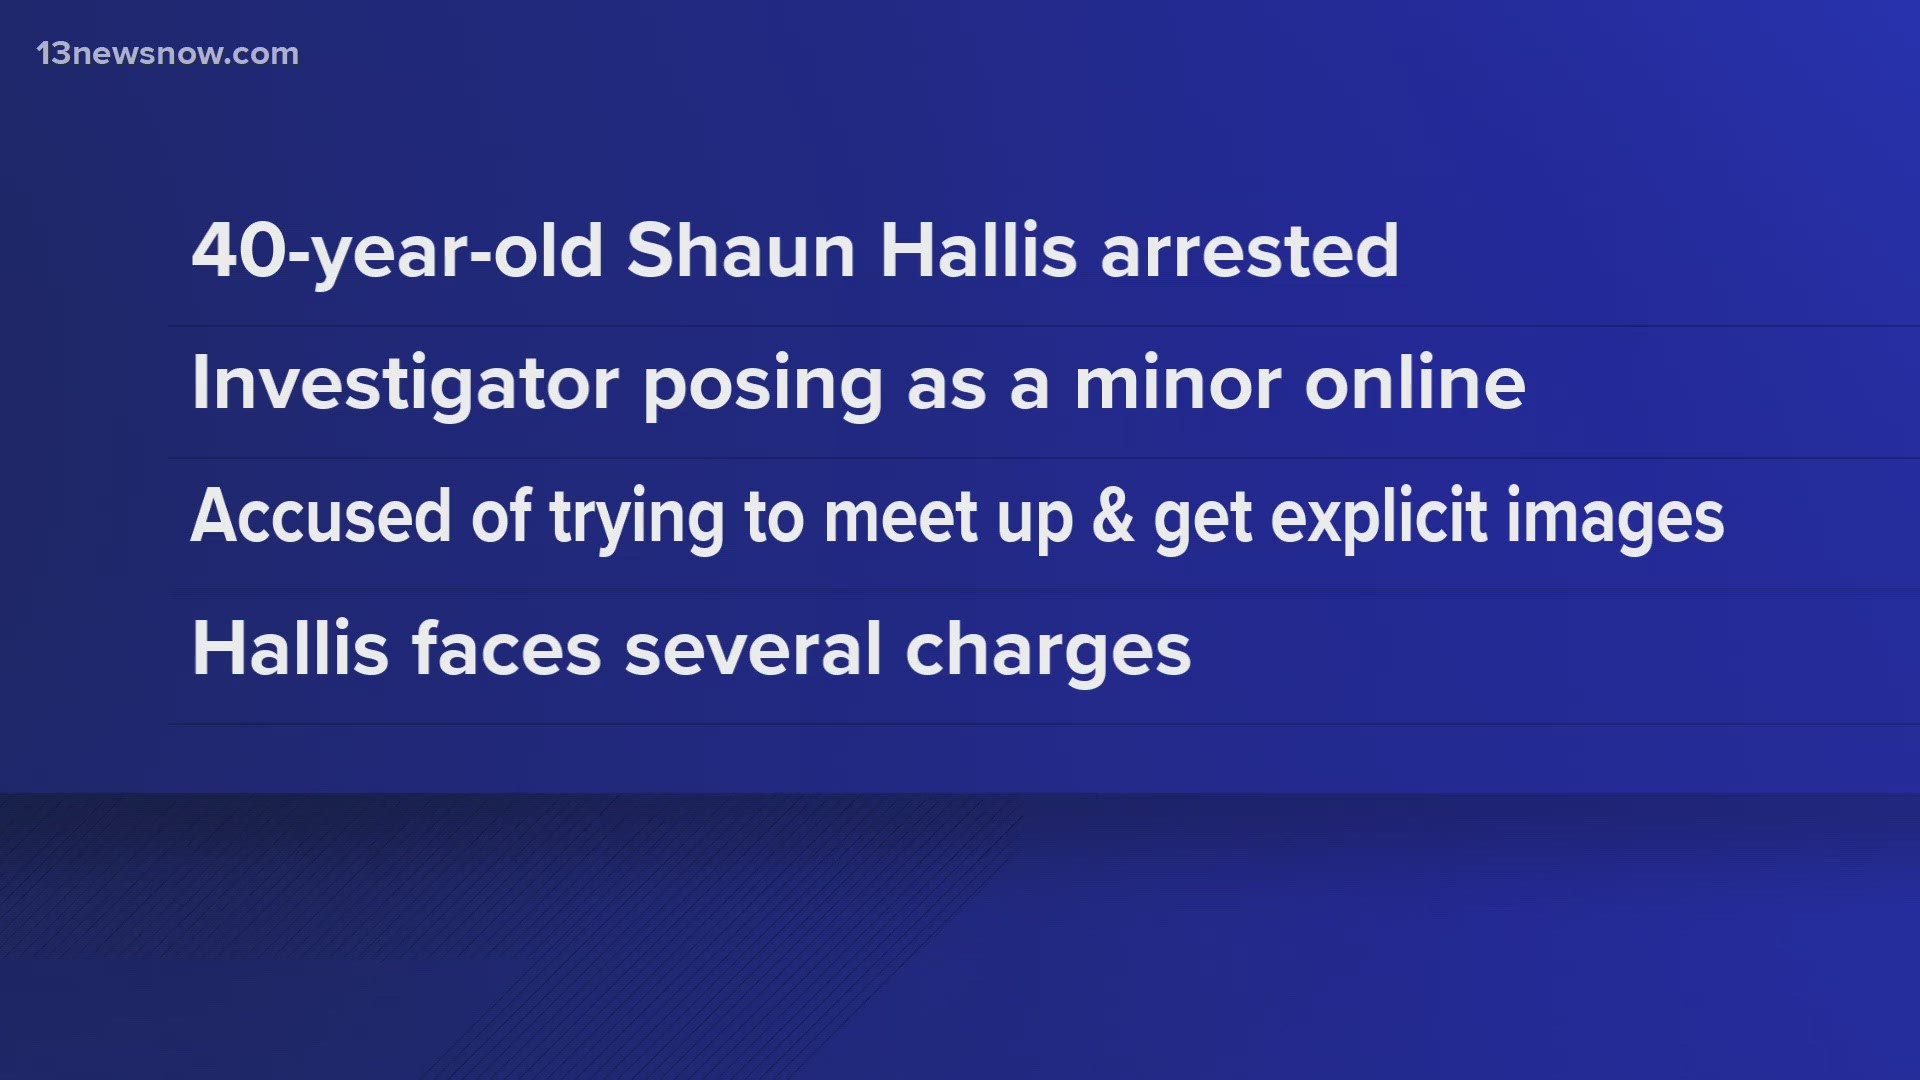 Hallis faces multiple charges at this time.